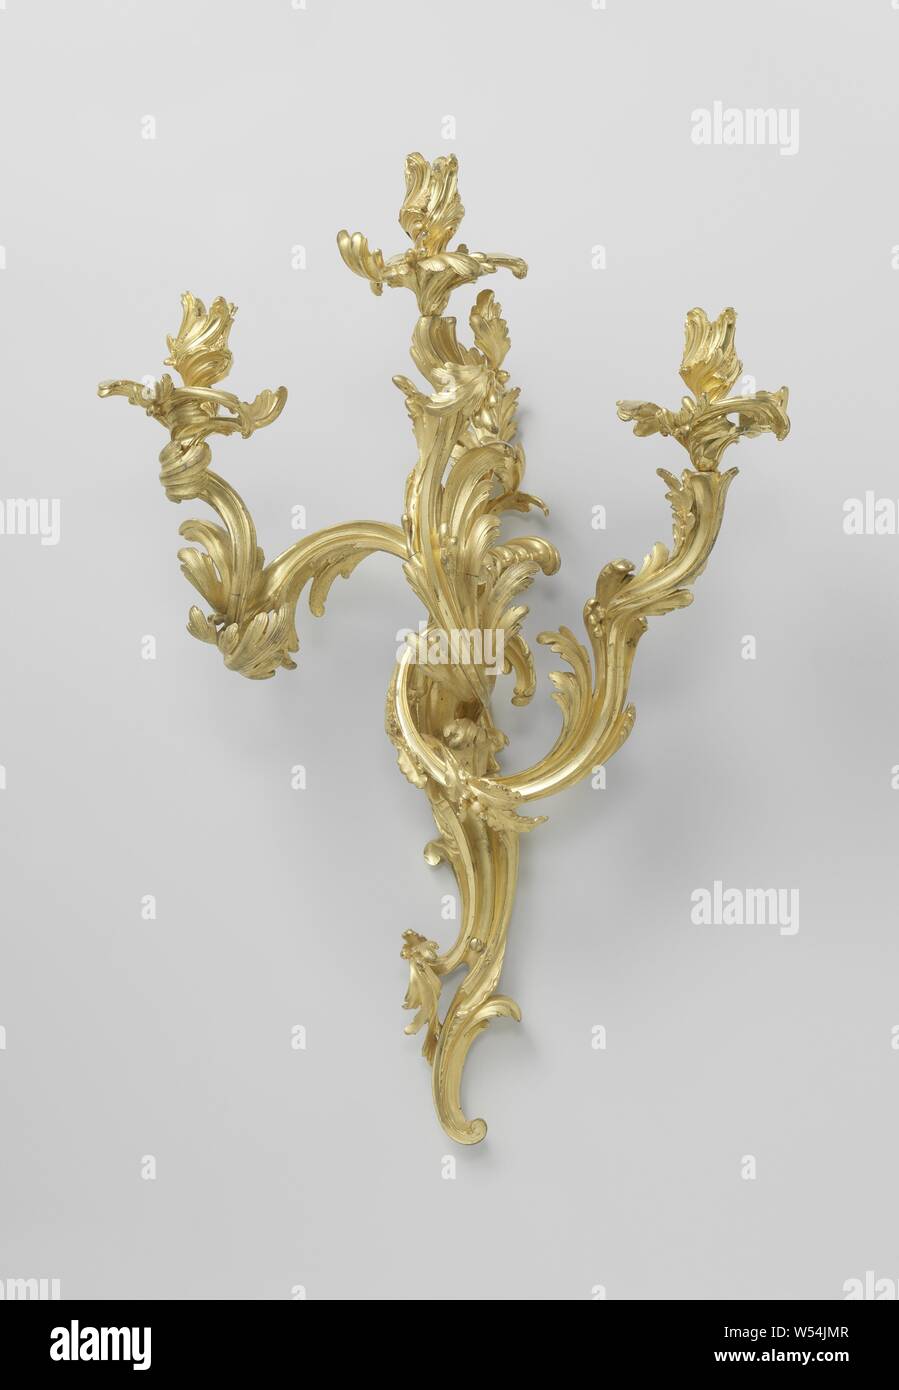 Wall arm of gilt bronze with three arms made of asymmetrical C and S-volutes, Wall arm of gilt bronze, with three arms. The trunk and arms are constructed from asymmetrical S and C-shaped leaf motifs, as well as the fat traps and candle holders. The old inventory number 14 is affixed to the wall arms., anonymous, Paris, c. 1750 - c. 1760, bronze (metal), gilding, h 80.3 cm × w 53.0 cm × d 32.3 cm Stock Photo